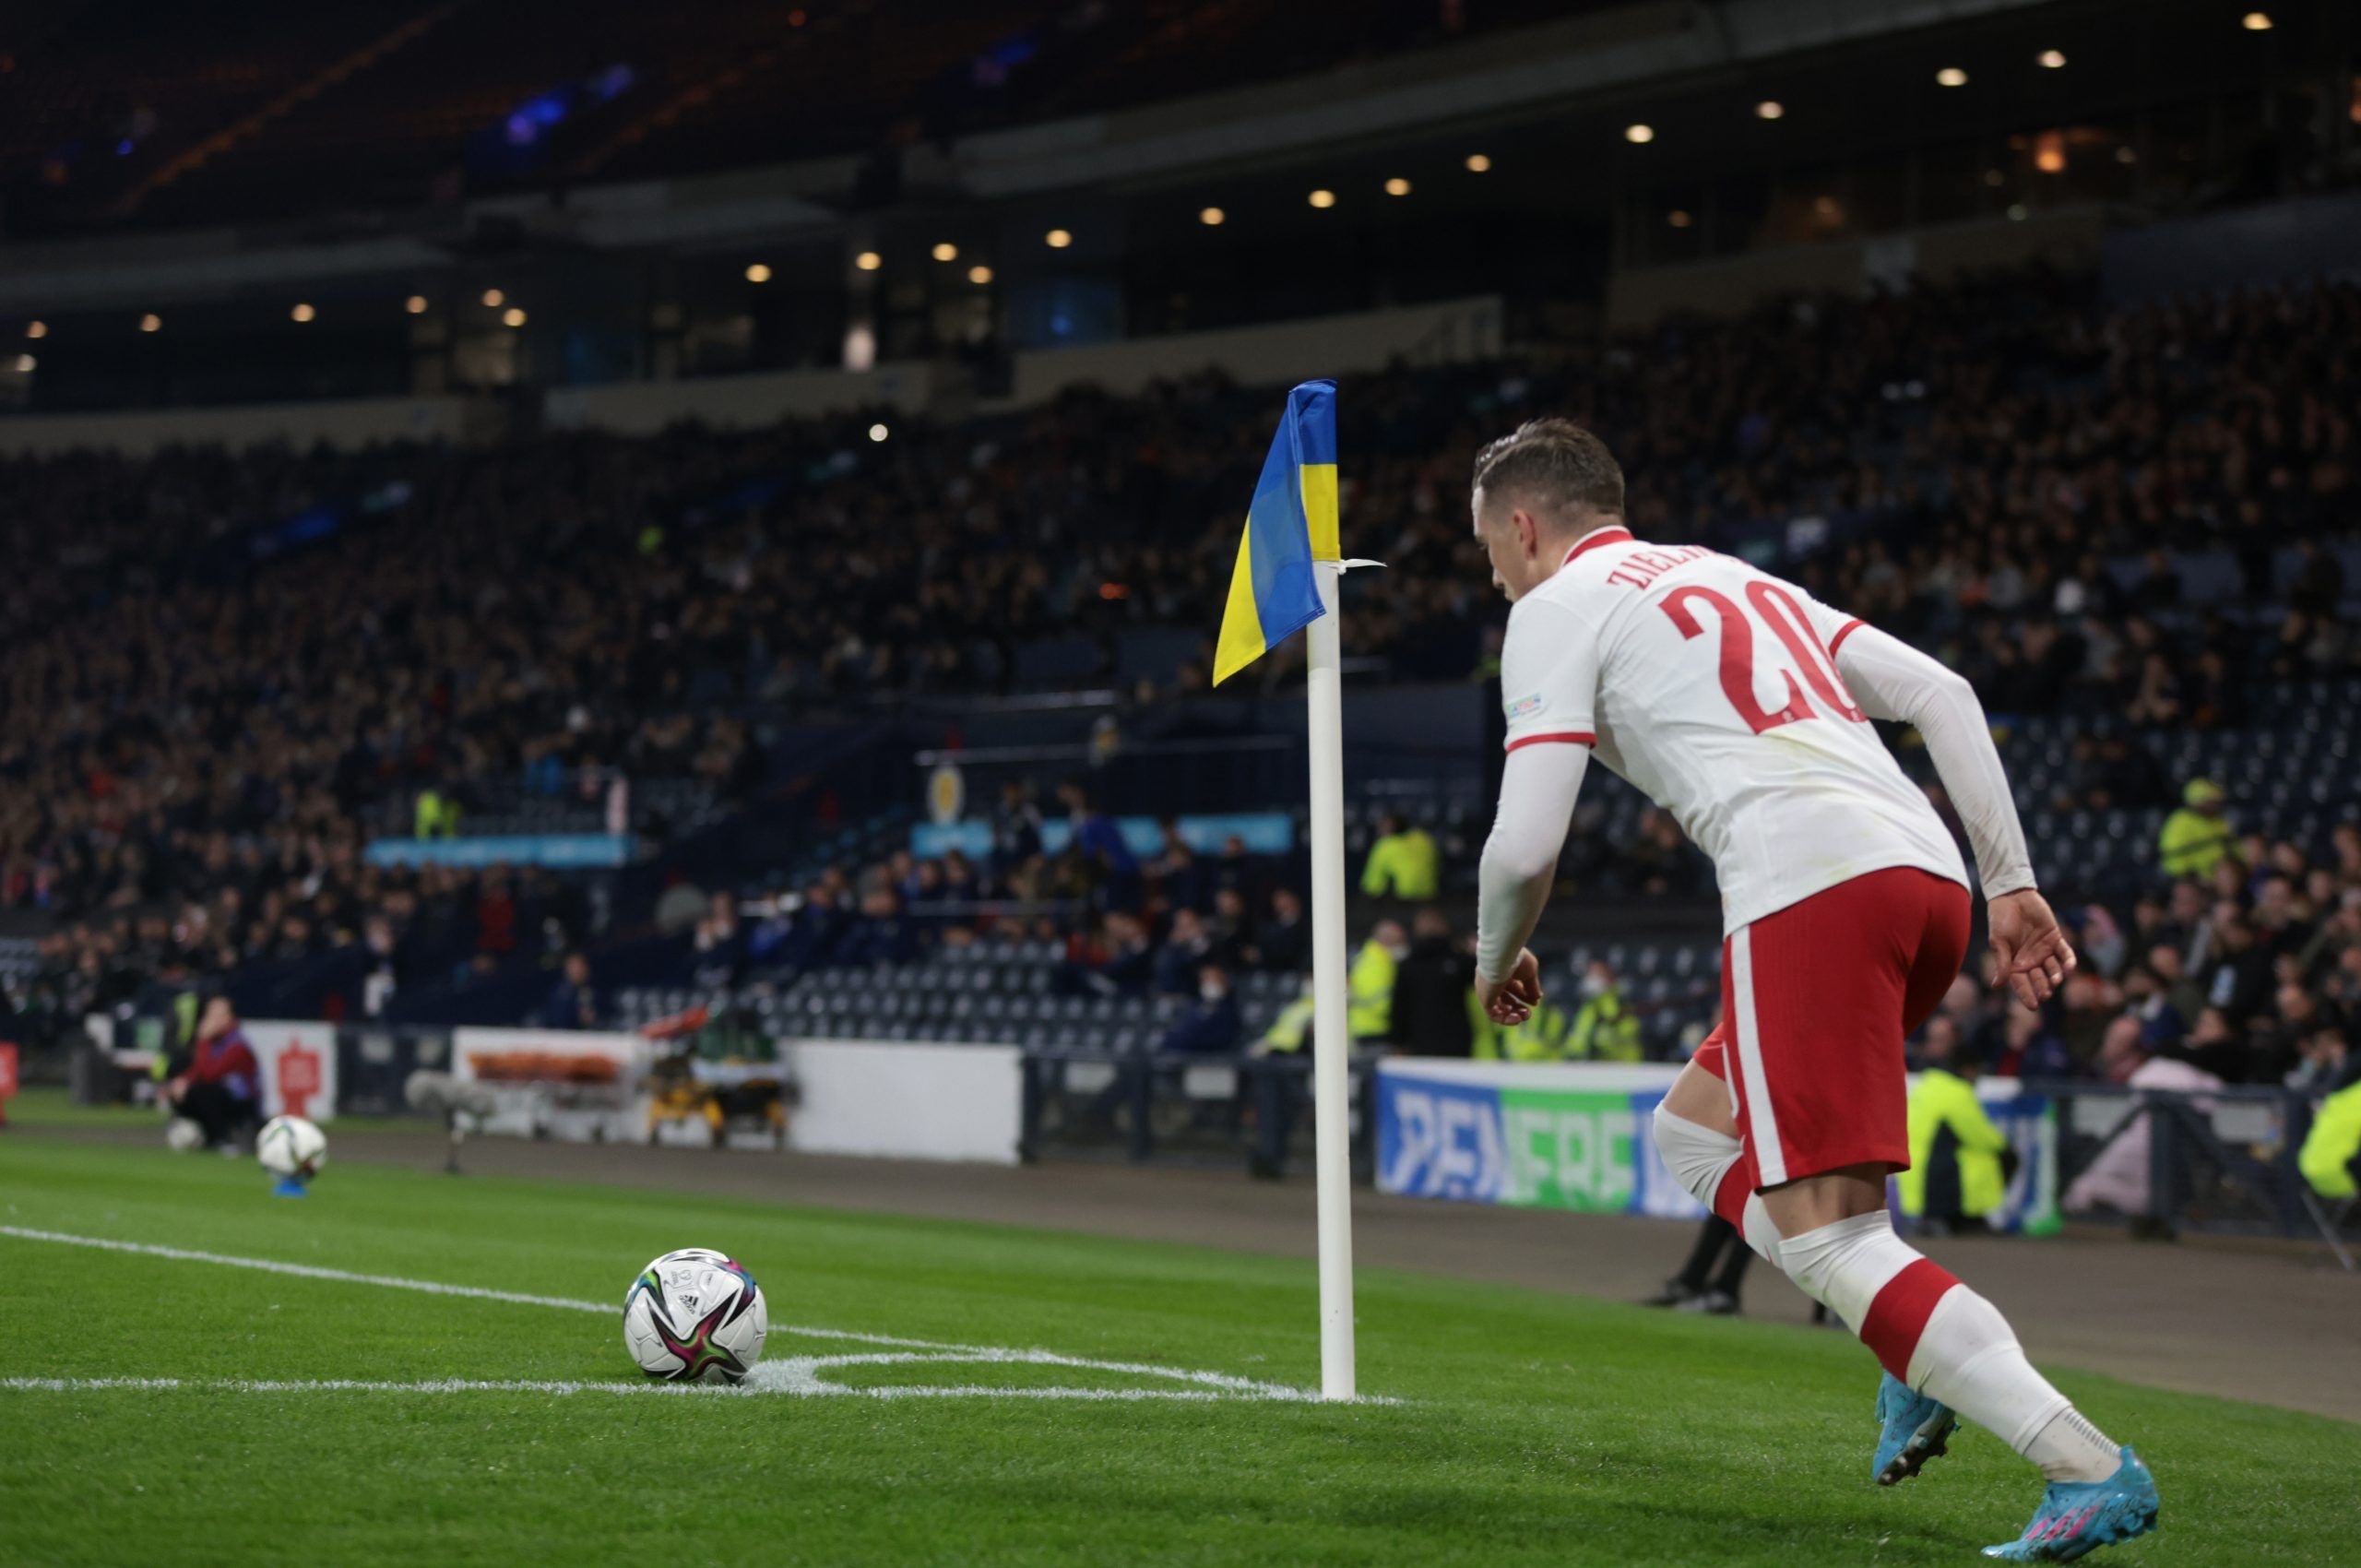 Soccer Football - International Friendly - Scotland v Poland - Hampden Park, Glasgow, Scotland, Britain - March 24, 2022 A corner flag is seen in support for Ukraine amid Russia's invasion as Poland's Piotr Zielinski takes a corner Action Images via Reuters/Lee Smith